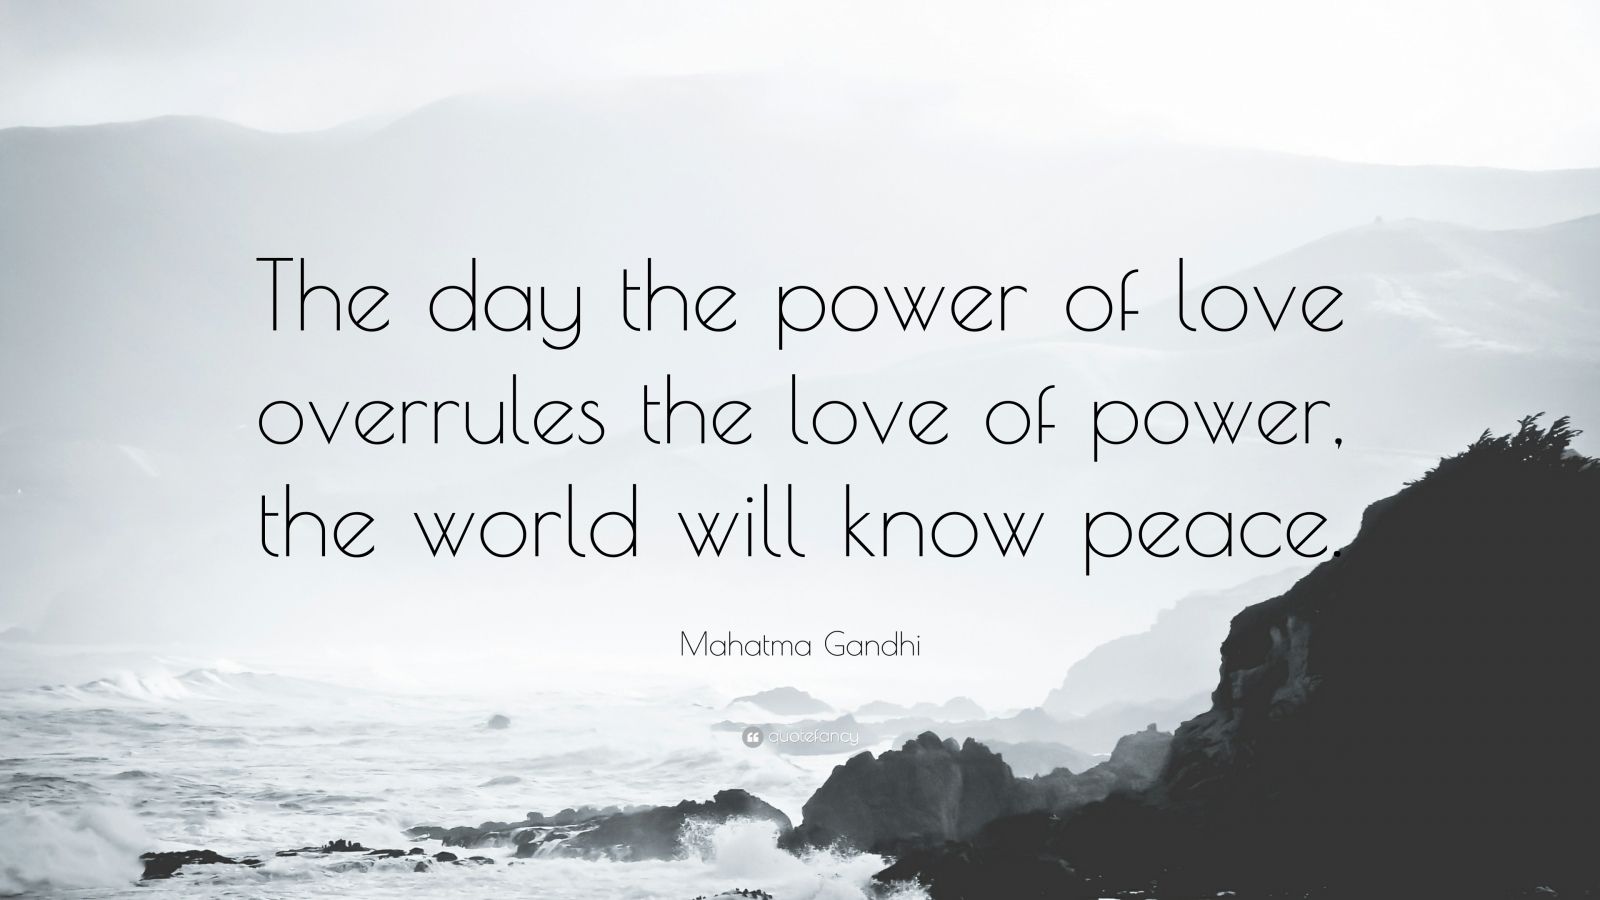 Mahatma Gandhi Quote “The day the power of love overrules the love of power